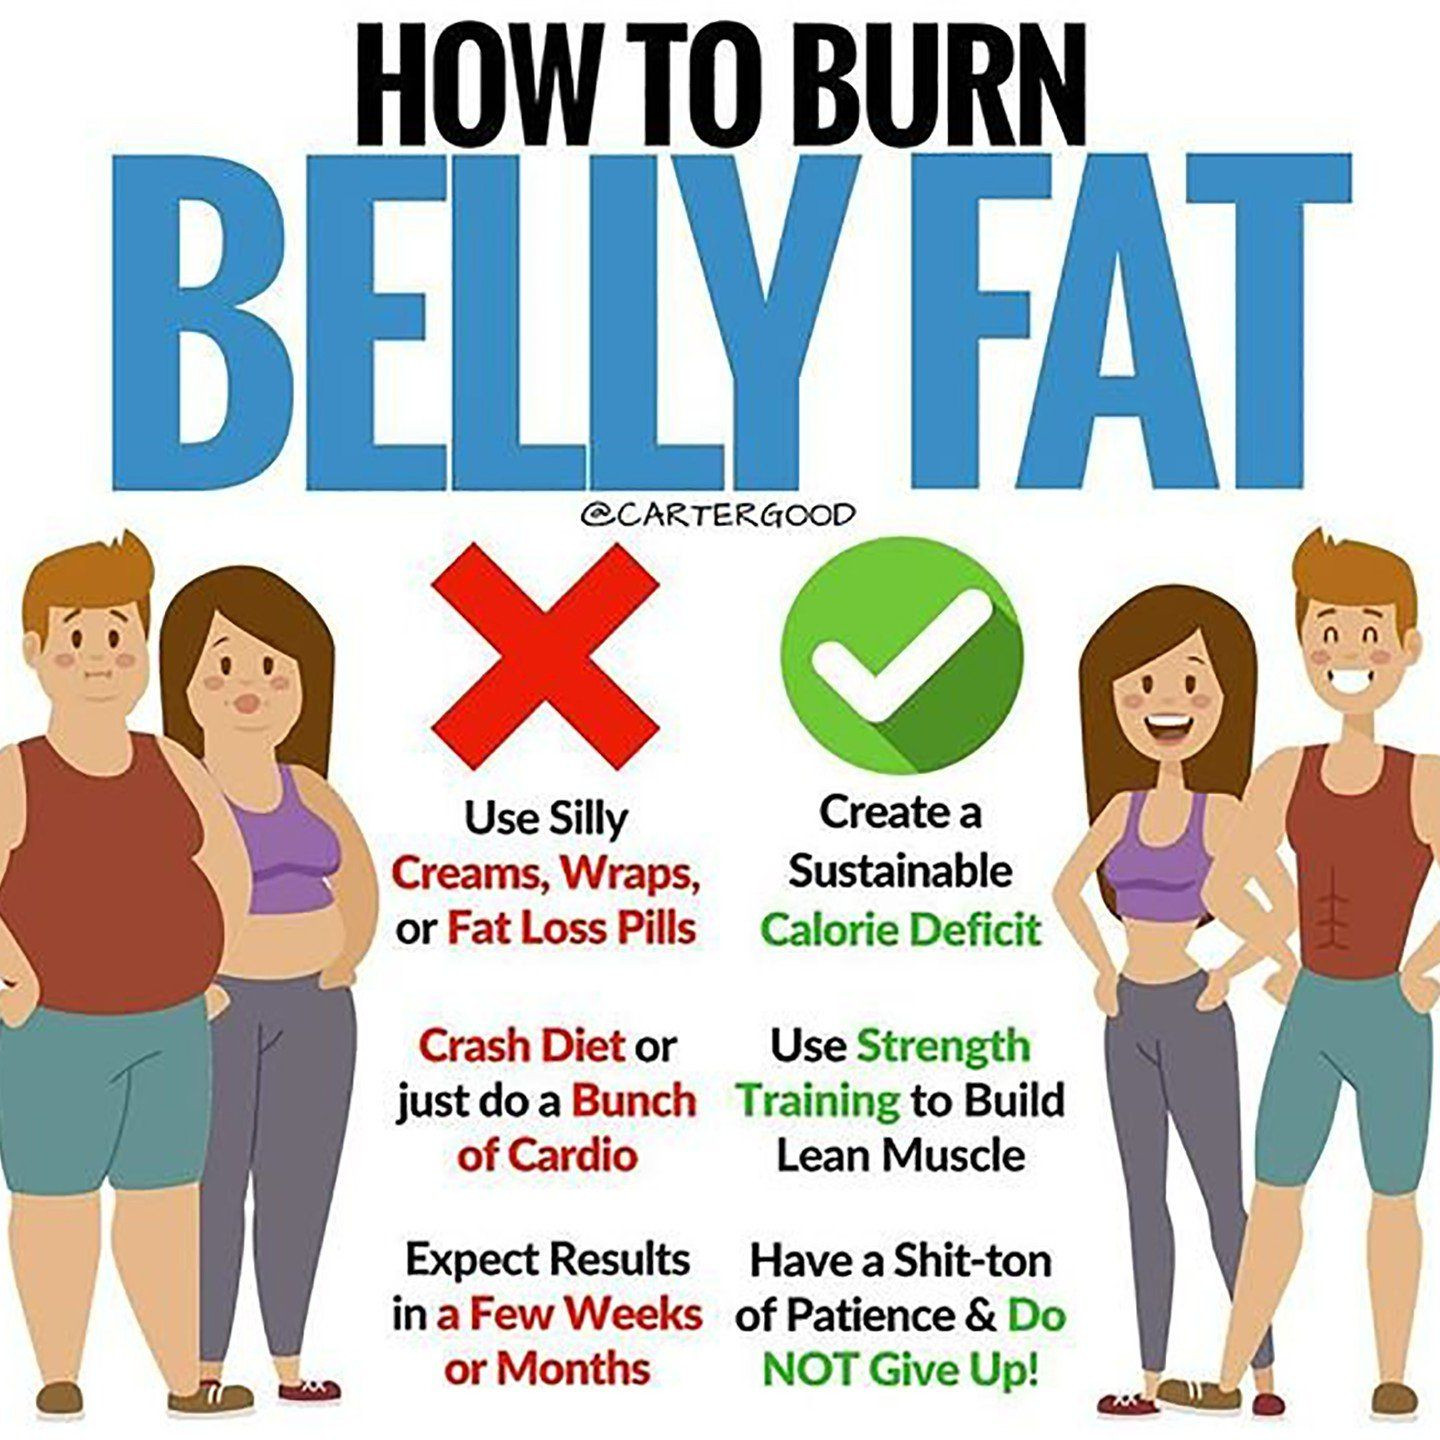 Fastest Way To Burn Belly Fat
 A Fat Loss Coach Says to Do These 3 Things to Burn Belly